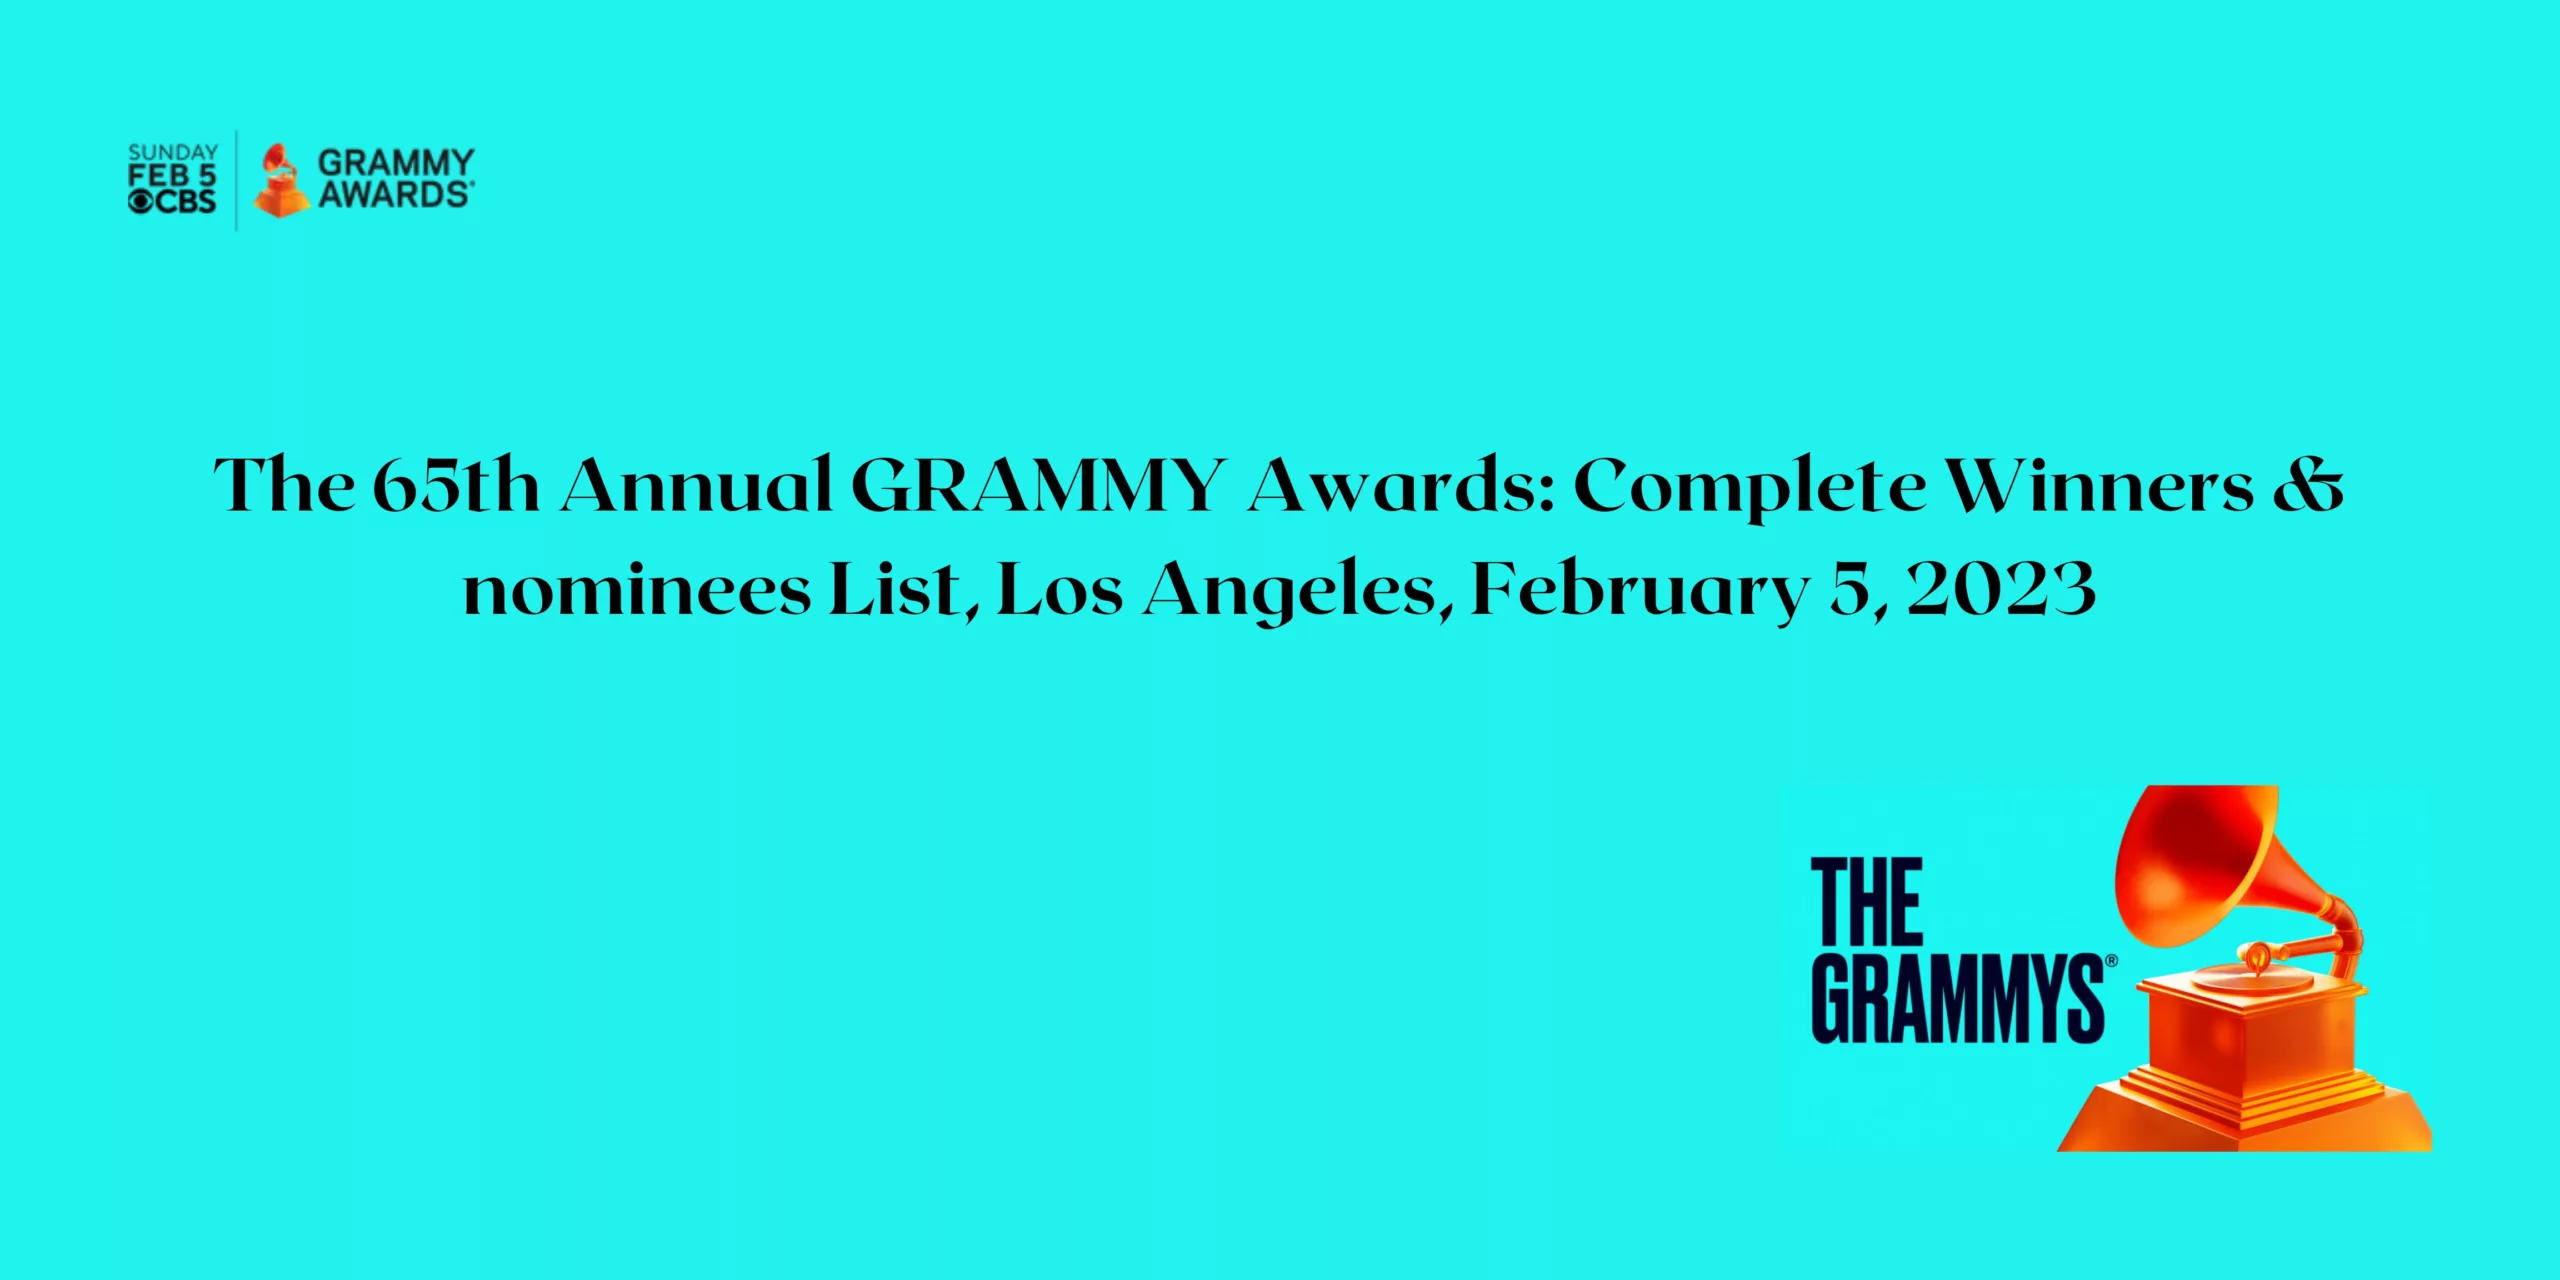 The 65th Annual GRAMMY Awards: Complete Winners & nominees List, Los Angeles, February 5, 2023